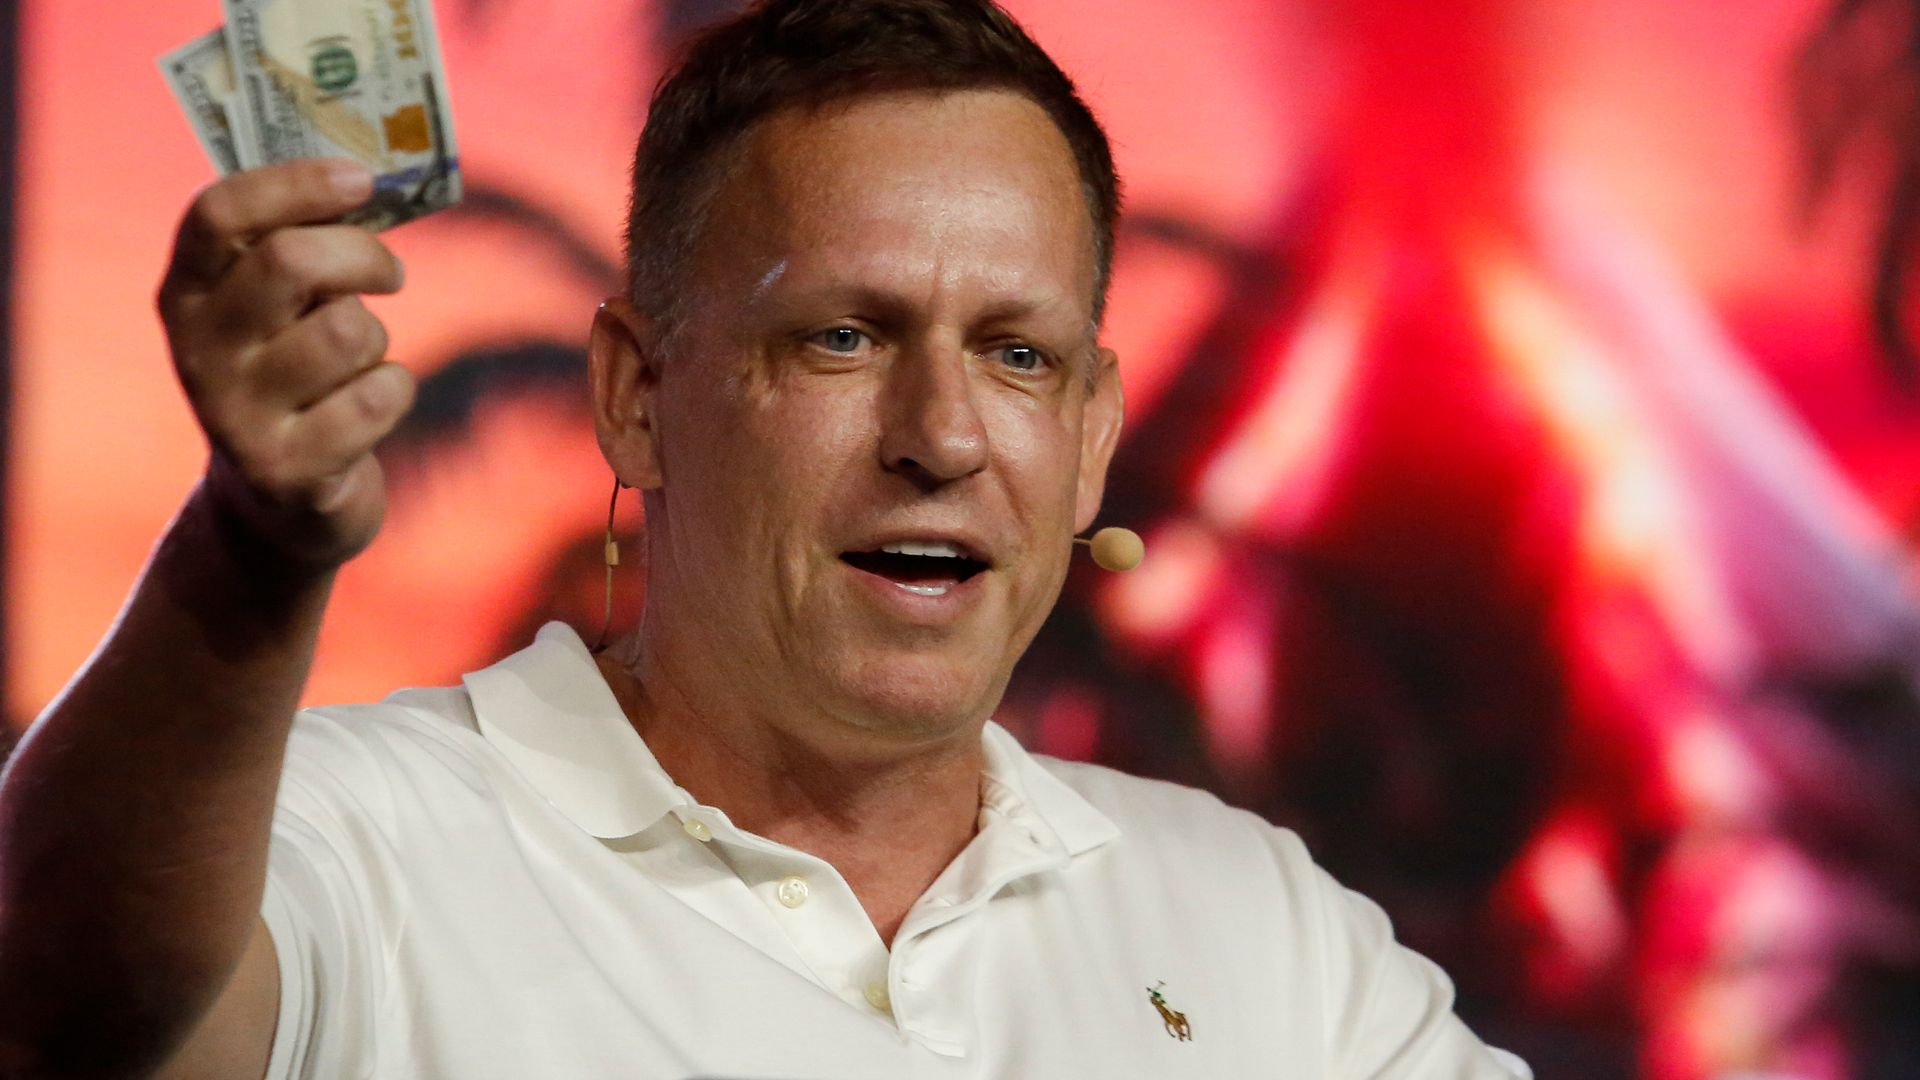 PayPal co-founder Peter Thiel has invested in the "Enhanced Games," an event that pegs itself as a doping-friendly version of the Olympics.